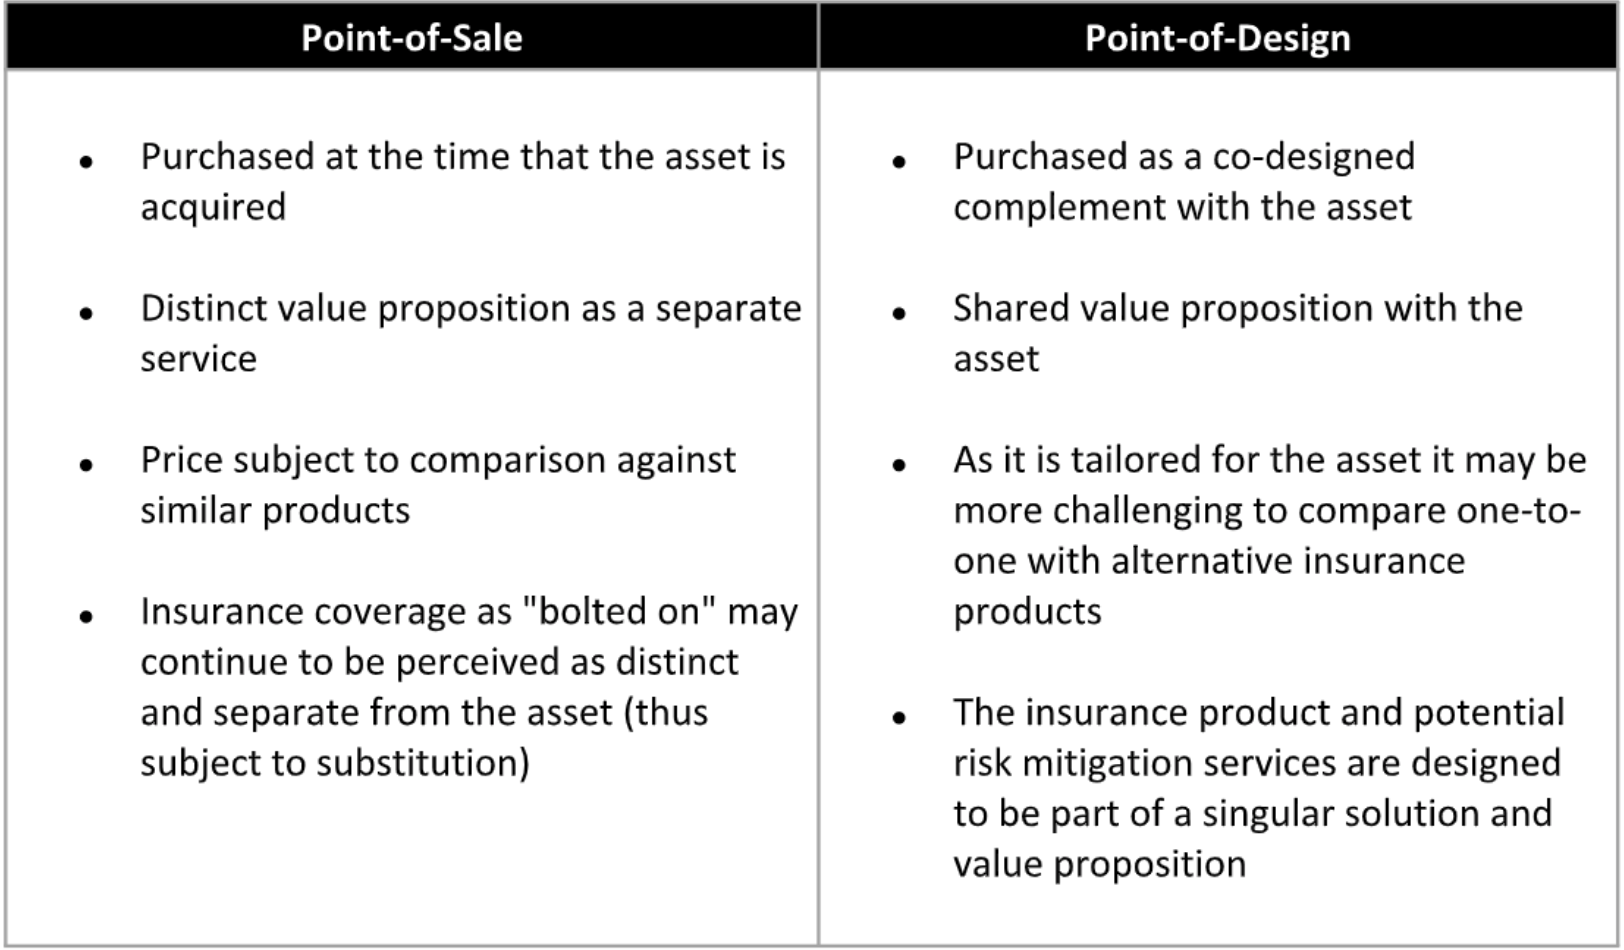 Chart with two columns comparing point-of-sale and point-of-design for embedded insurance